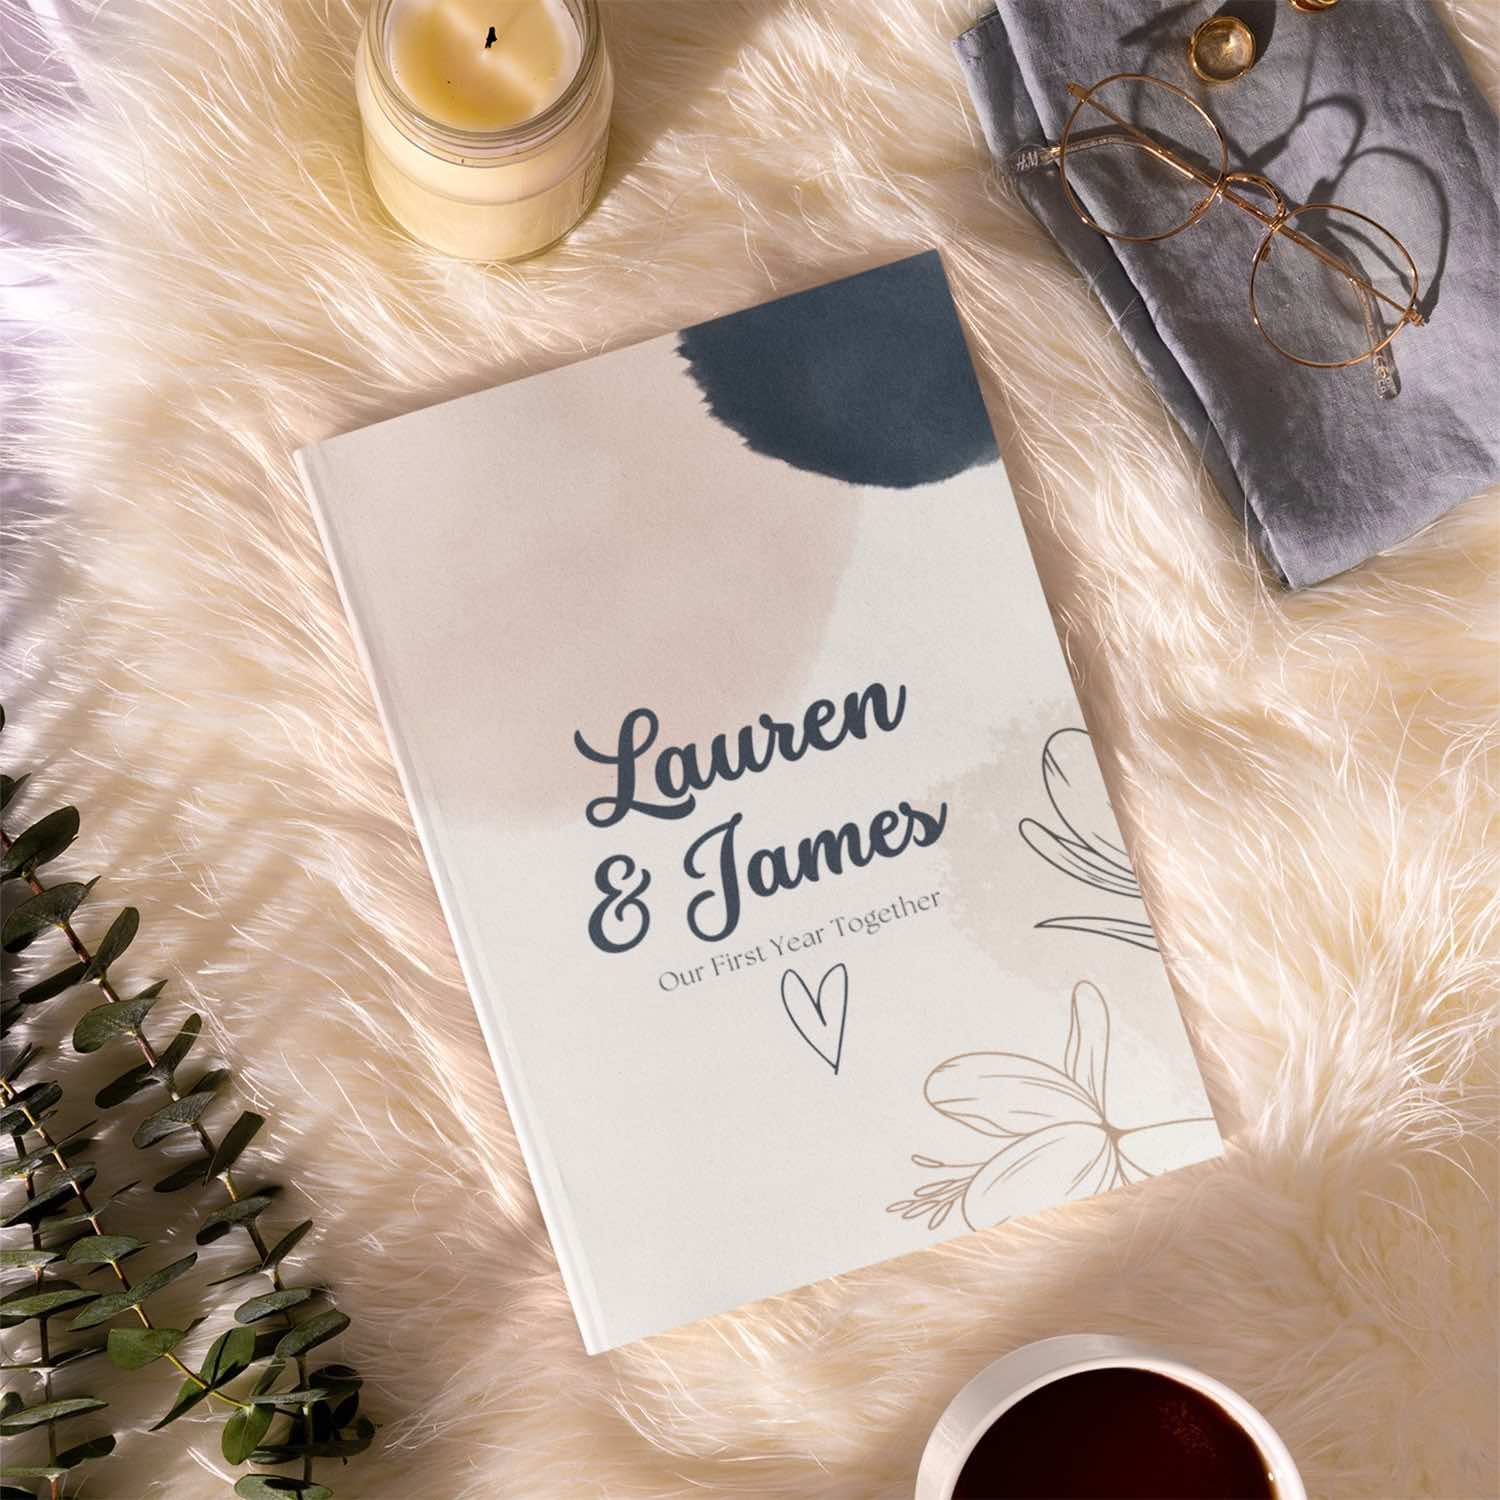 Our first year together personalized book. First anniversary gift idea